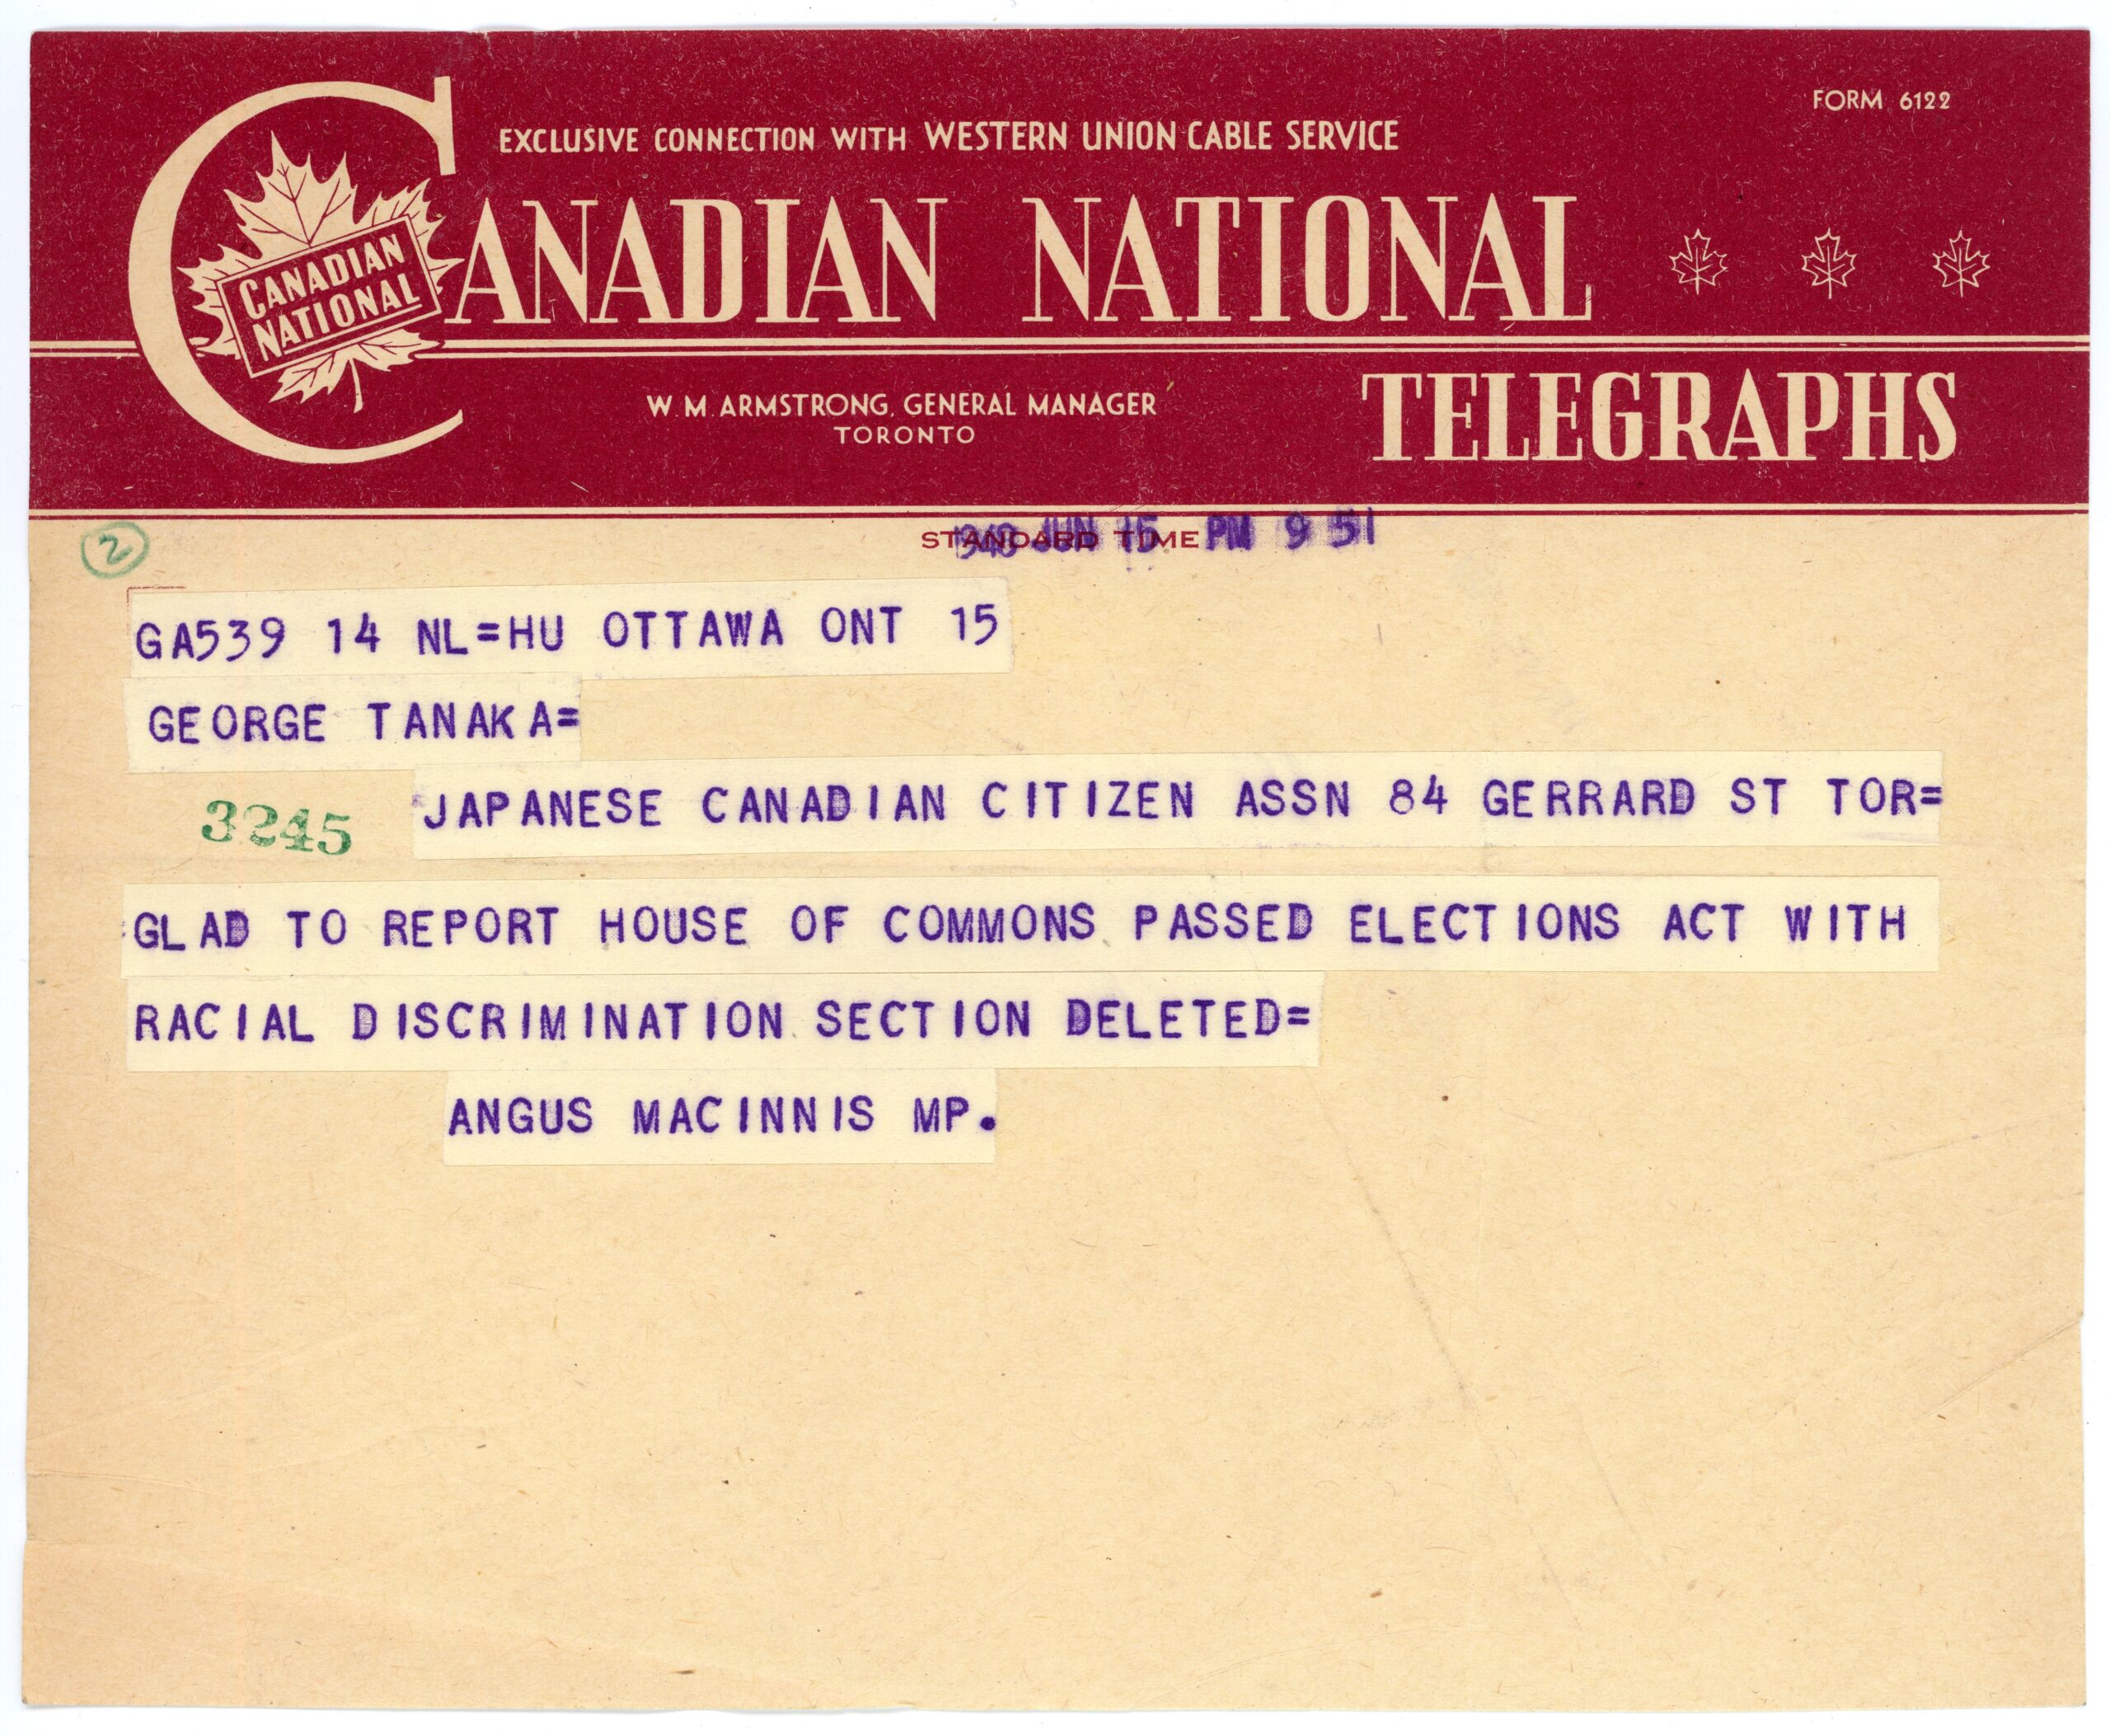 A Canadian National Telegraphs telegram reads: “1948 JUN 15, PM 9:51 / GA539 14 NL=HU OTTAWA ONT 15 / GEORGE TANAKA= / JAPANESE CANADIAN CITIZEN ASSN 84 GERRARD ST TOR= / GLAD TO REPORT HOUSE OF COMMONS PASSED ELECTIONS ACT WITH RACIAL DISCRIMINATION SECTION DELETED= / ANGUS MACINNIS MP.”